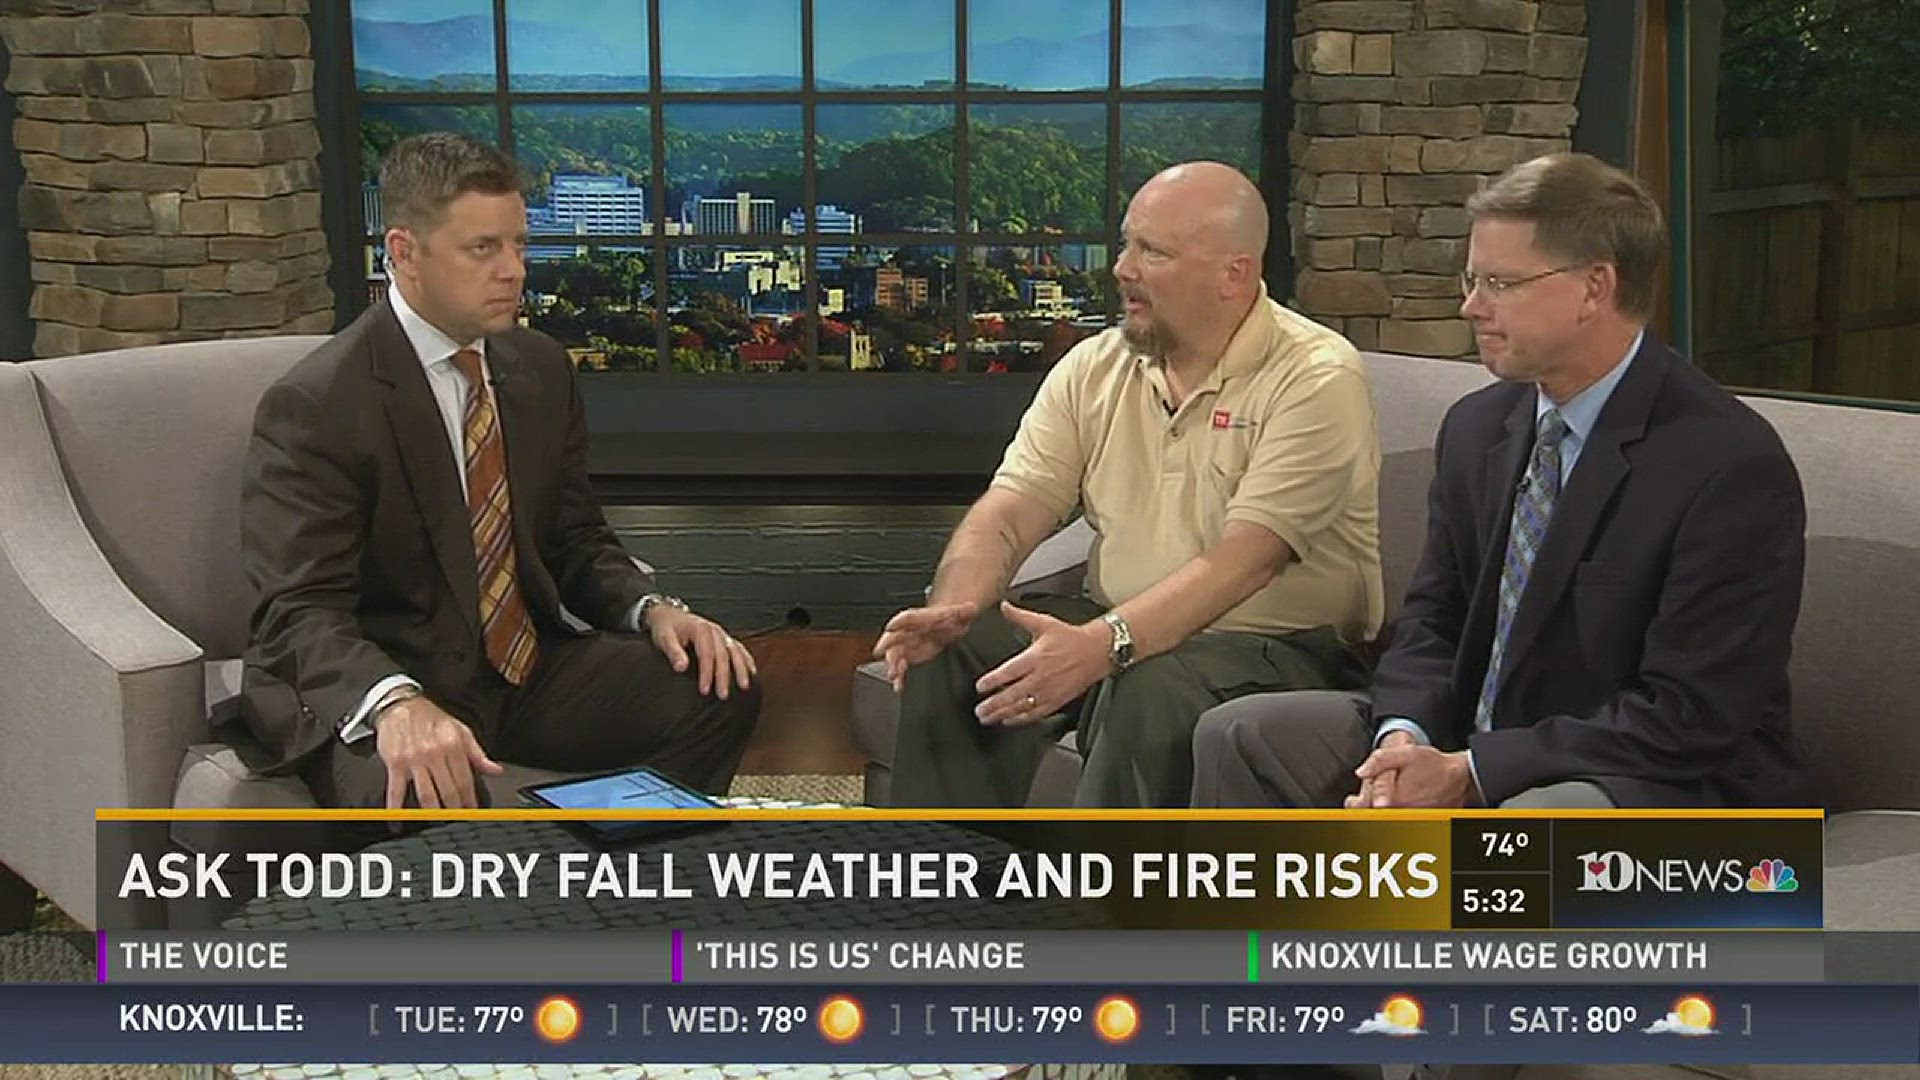 Oct. 10, 2016: Chief Meteorologist Todd Howell is joined by Nathan Waters, from the Tennessee Division of Forestry, to talk about dry conditions and how drought can influence wildfires.